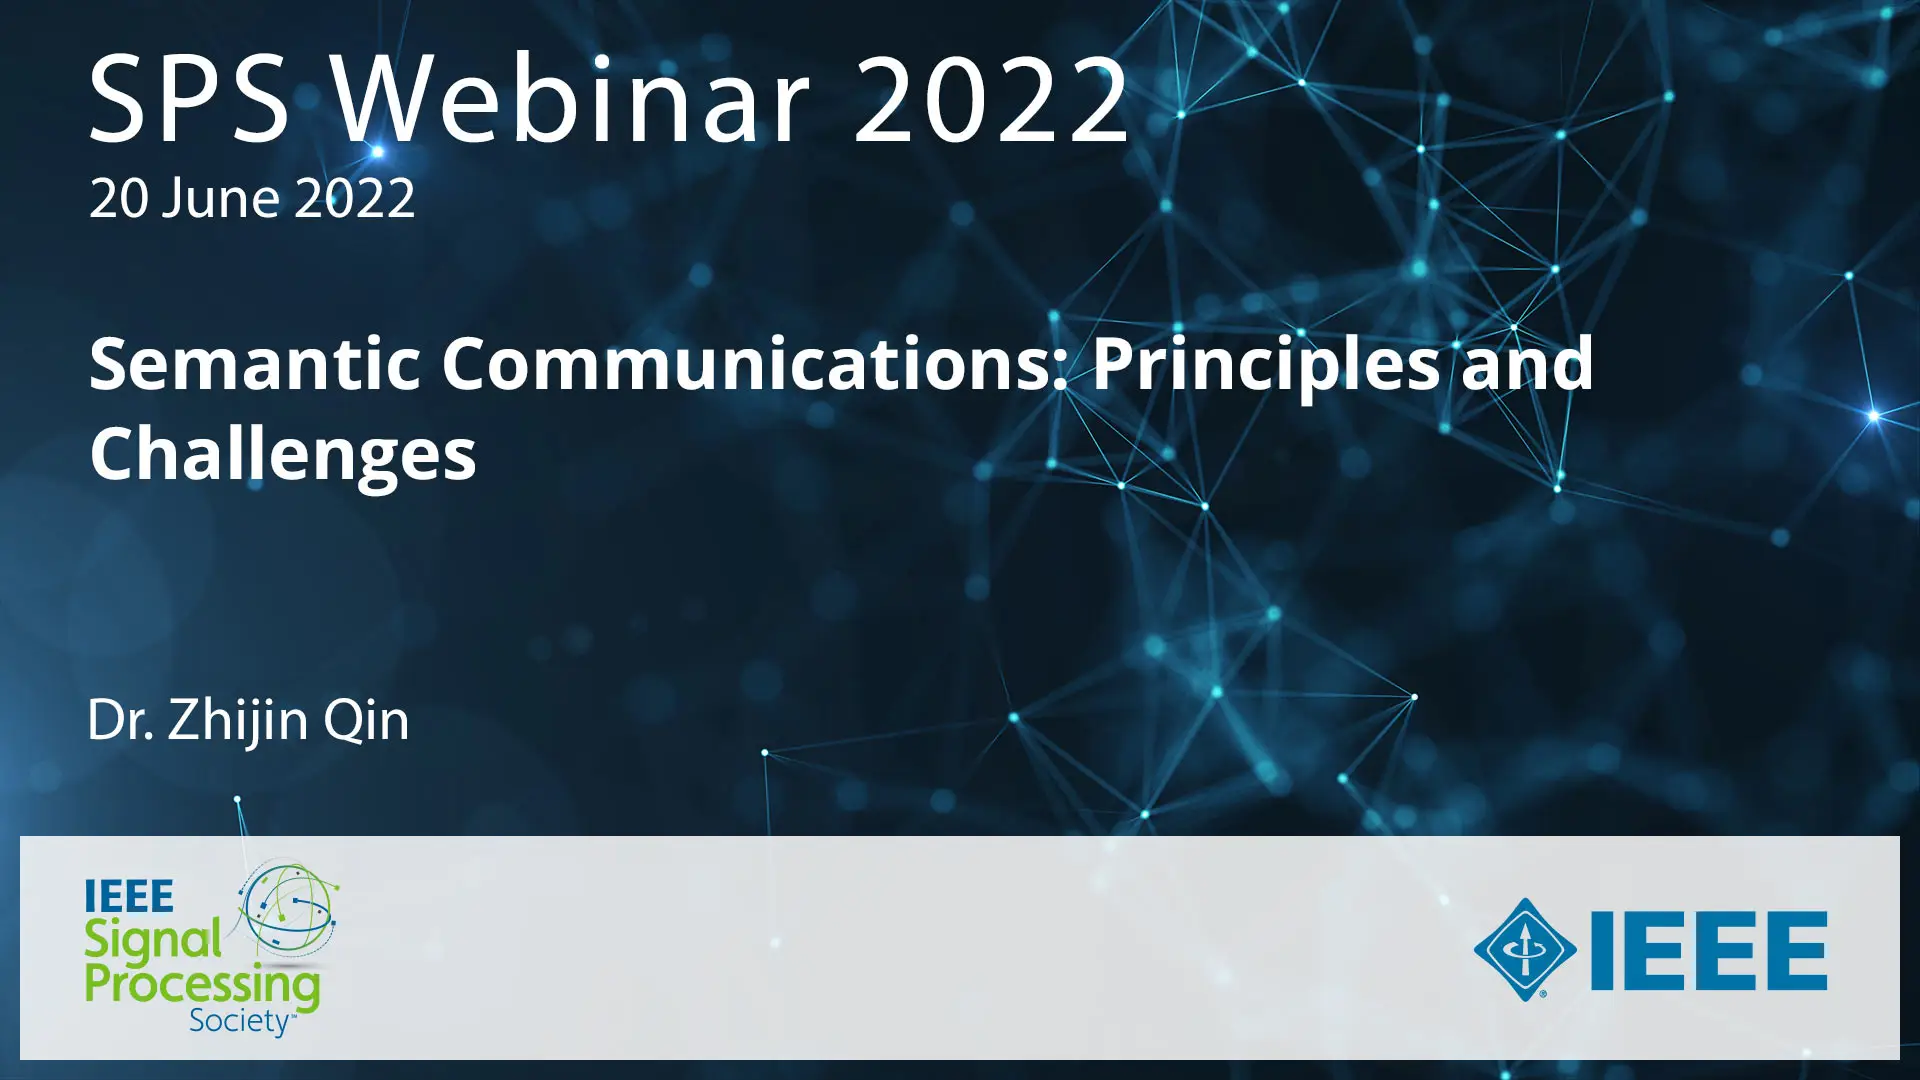 Semantic Communications: Principles and Challenges